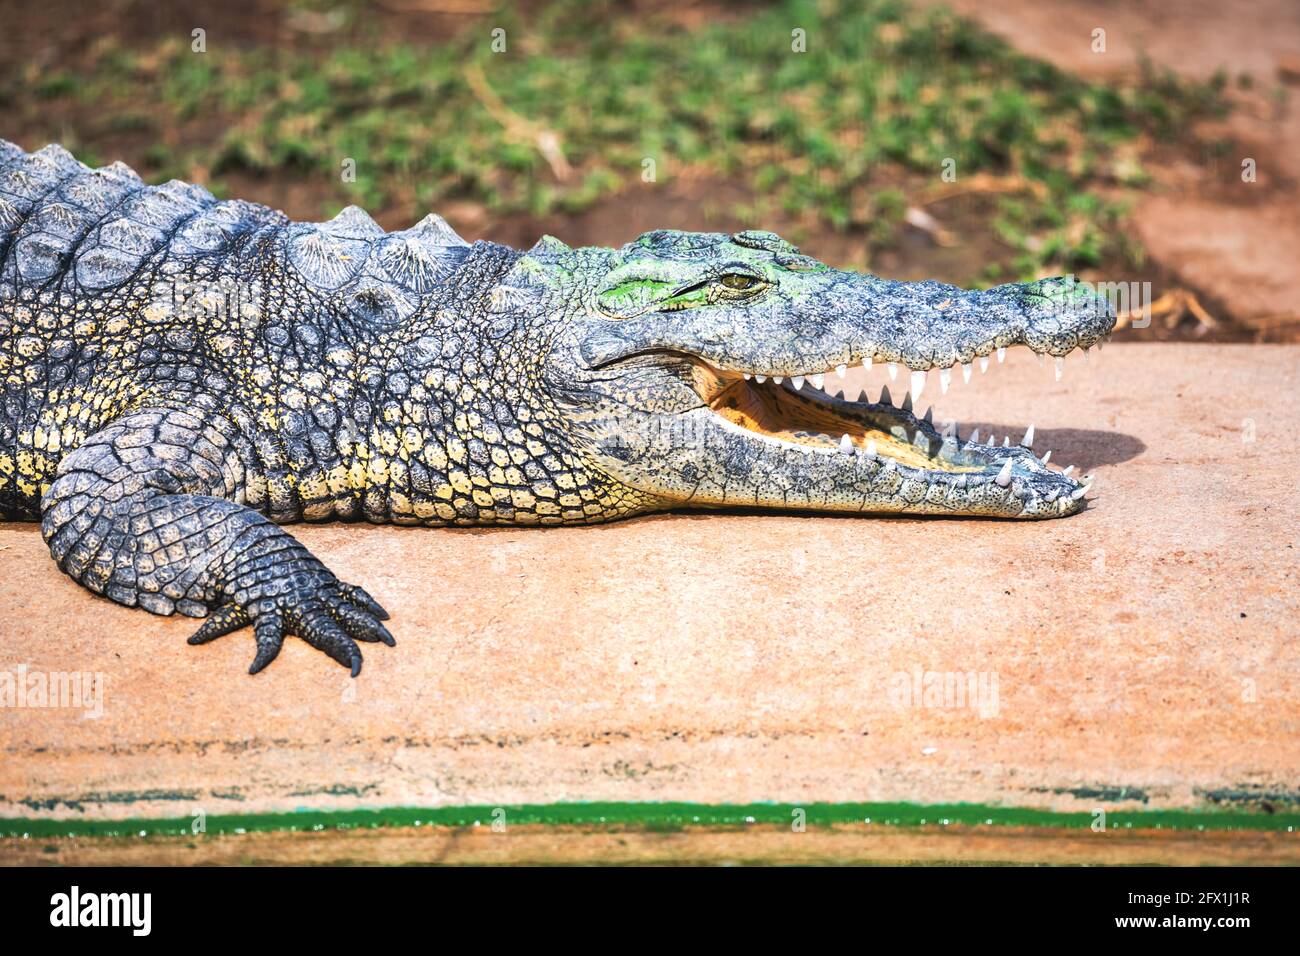 Big african alligator crocodile with open mouth on crocodile farm in Namibia, Africa. Wildlife photography Stock Photo